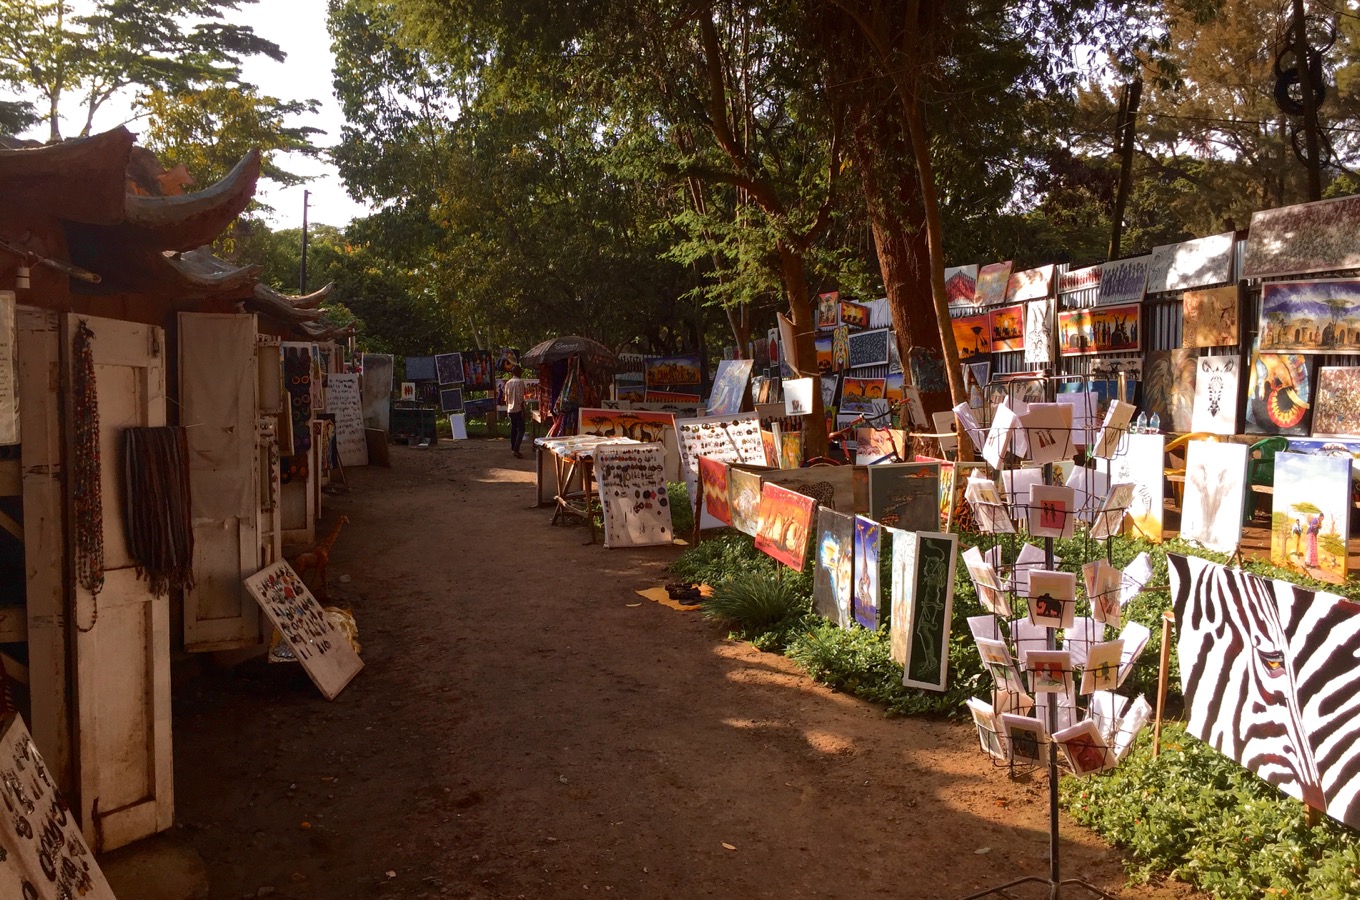 Artists‘ market in the center of Arusha